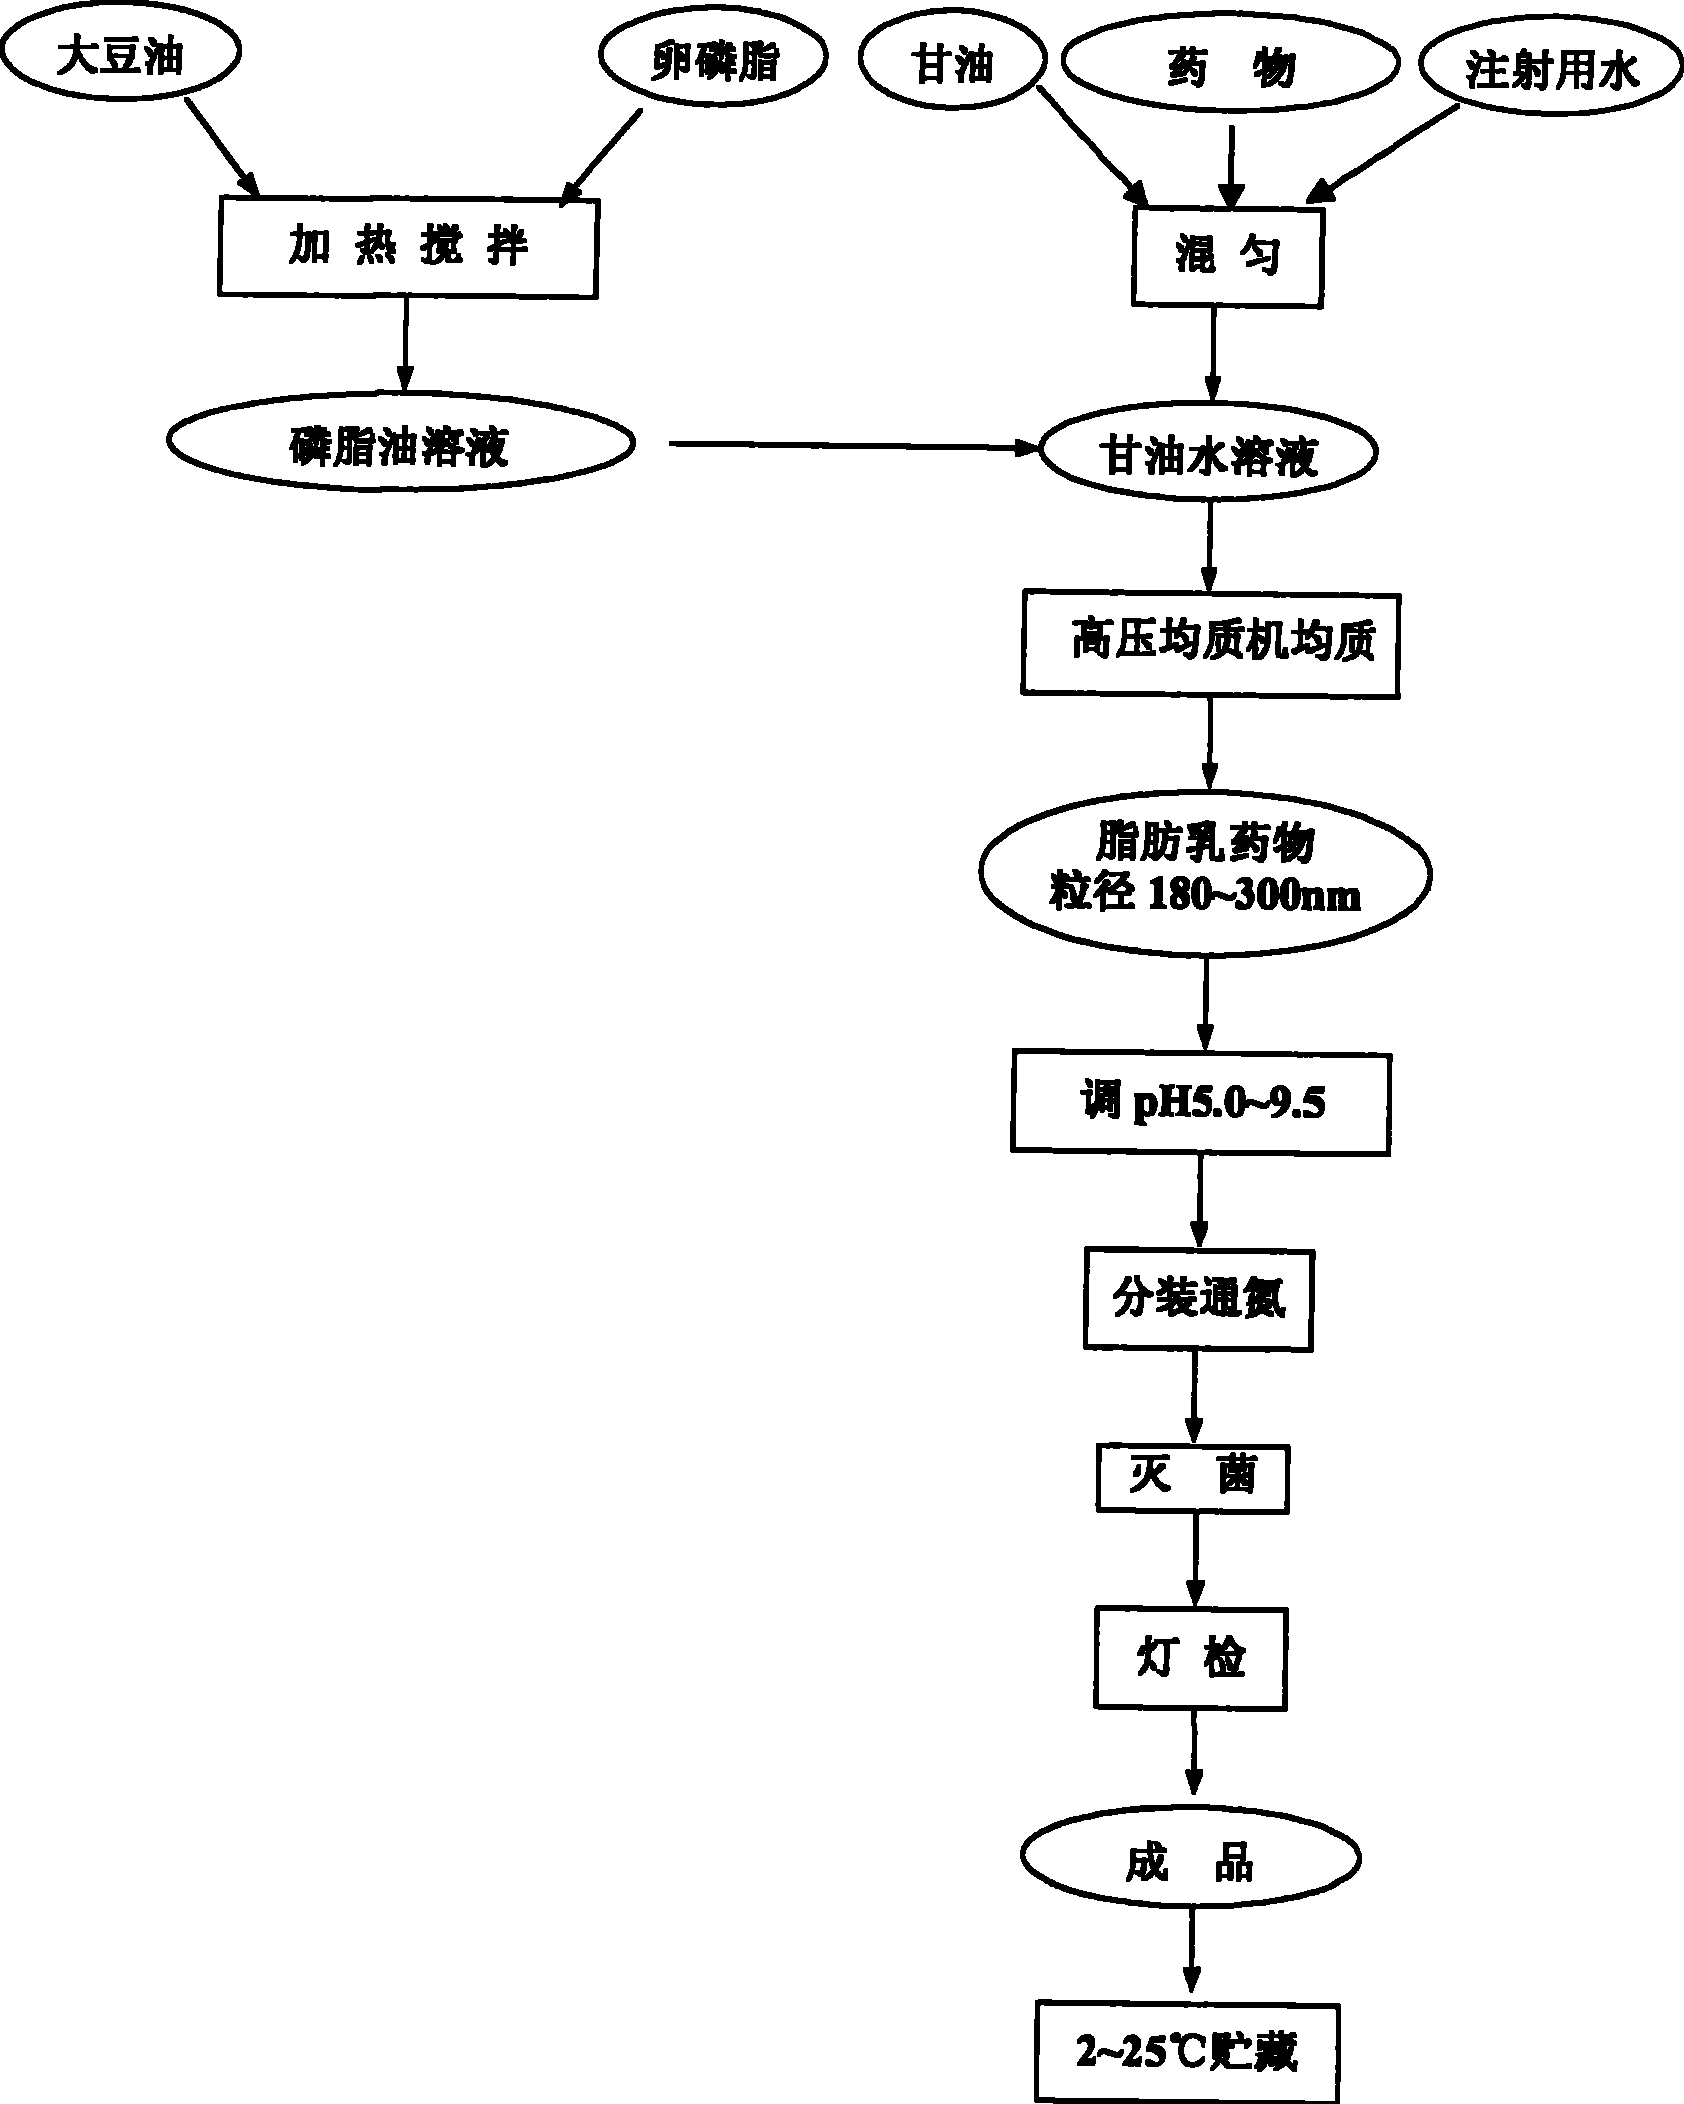 Compounded propofol fat emulsion injection containing analgesics and process for preparing same